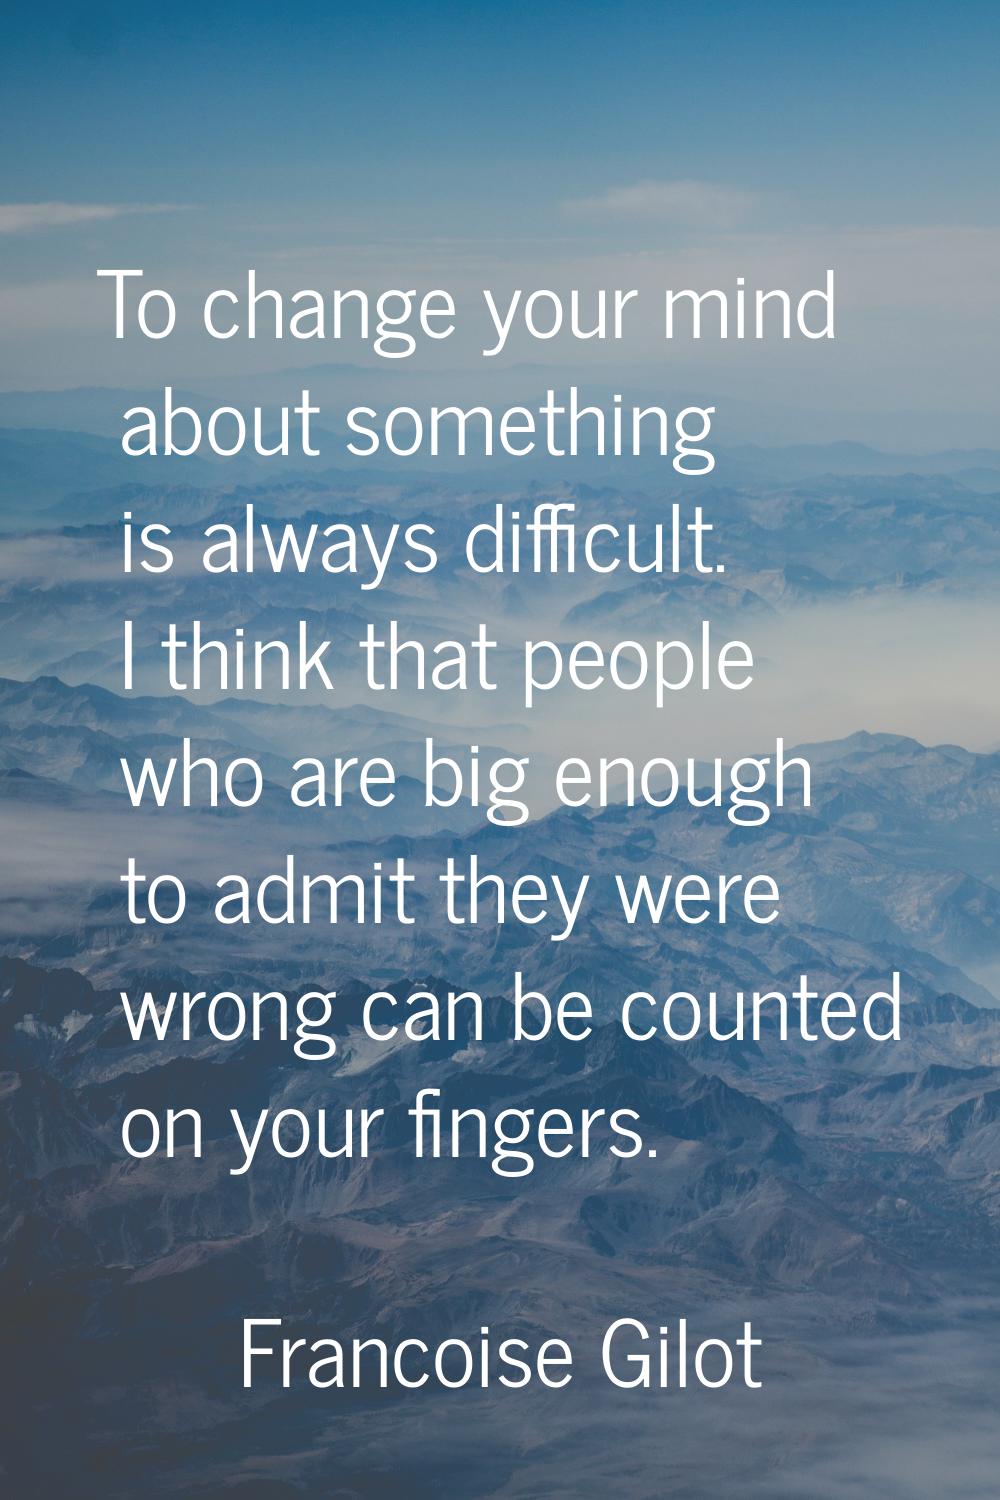 To change your mind about something is always difficult. I think that people who are big enough to 